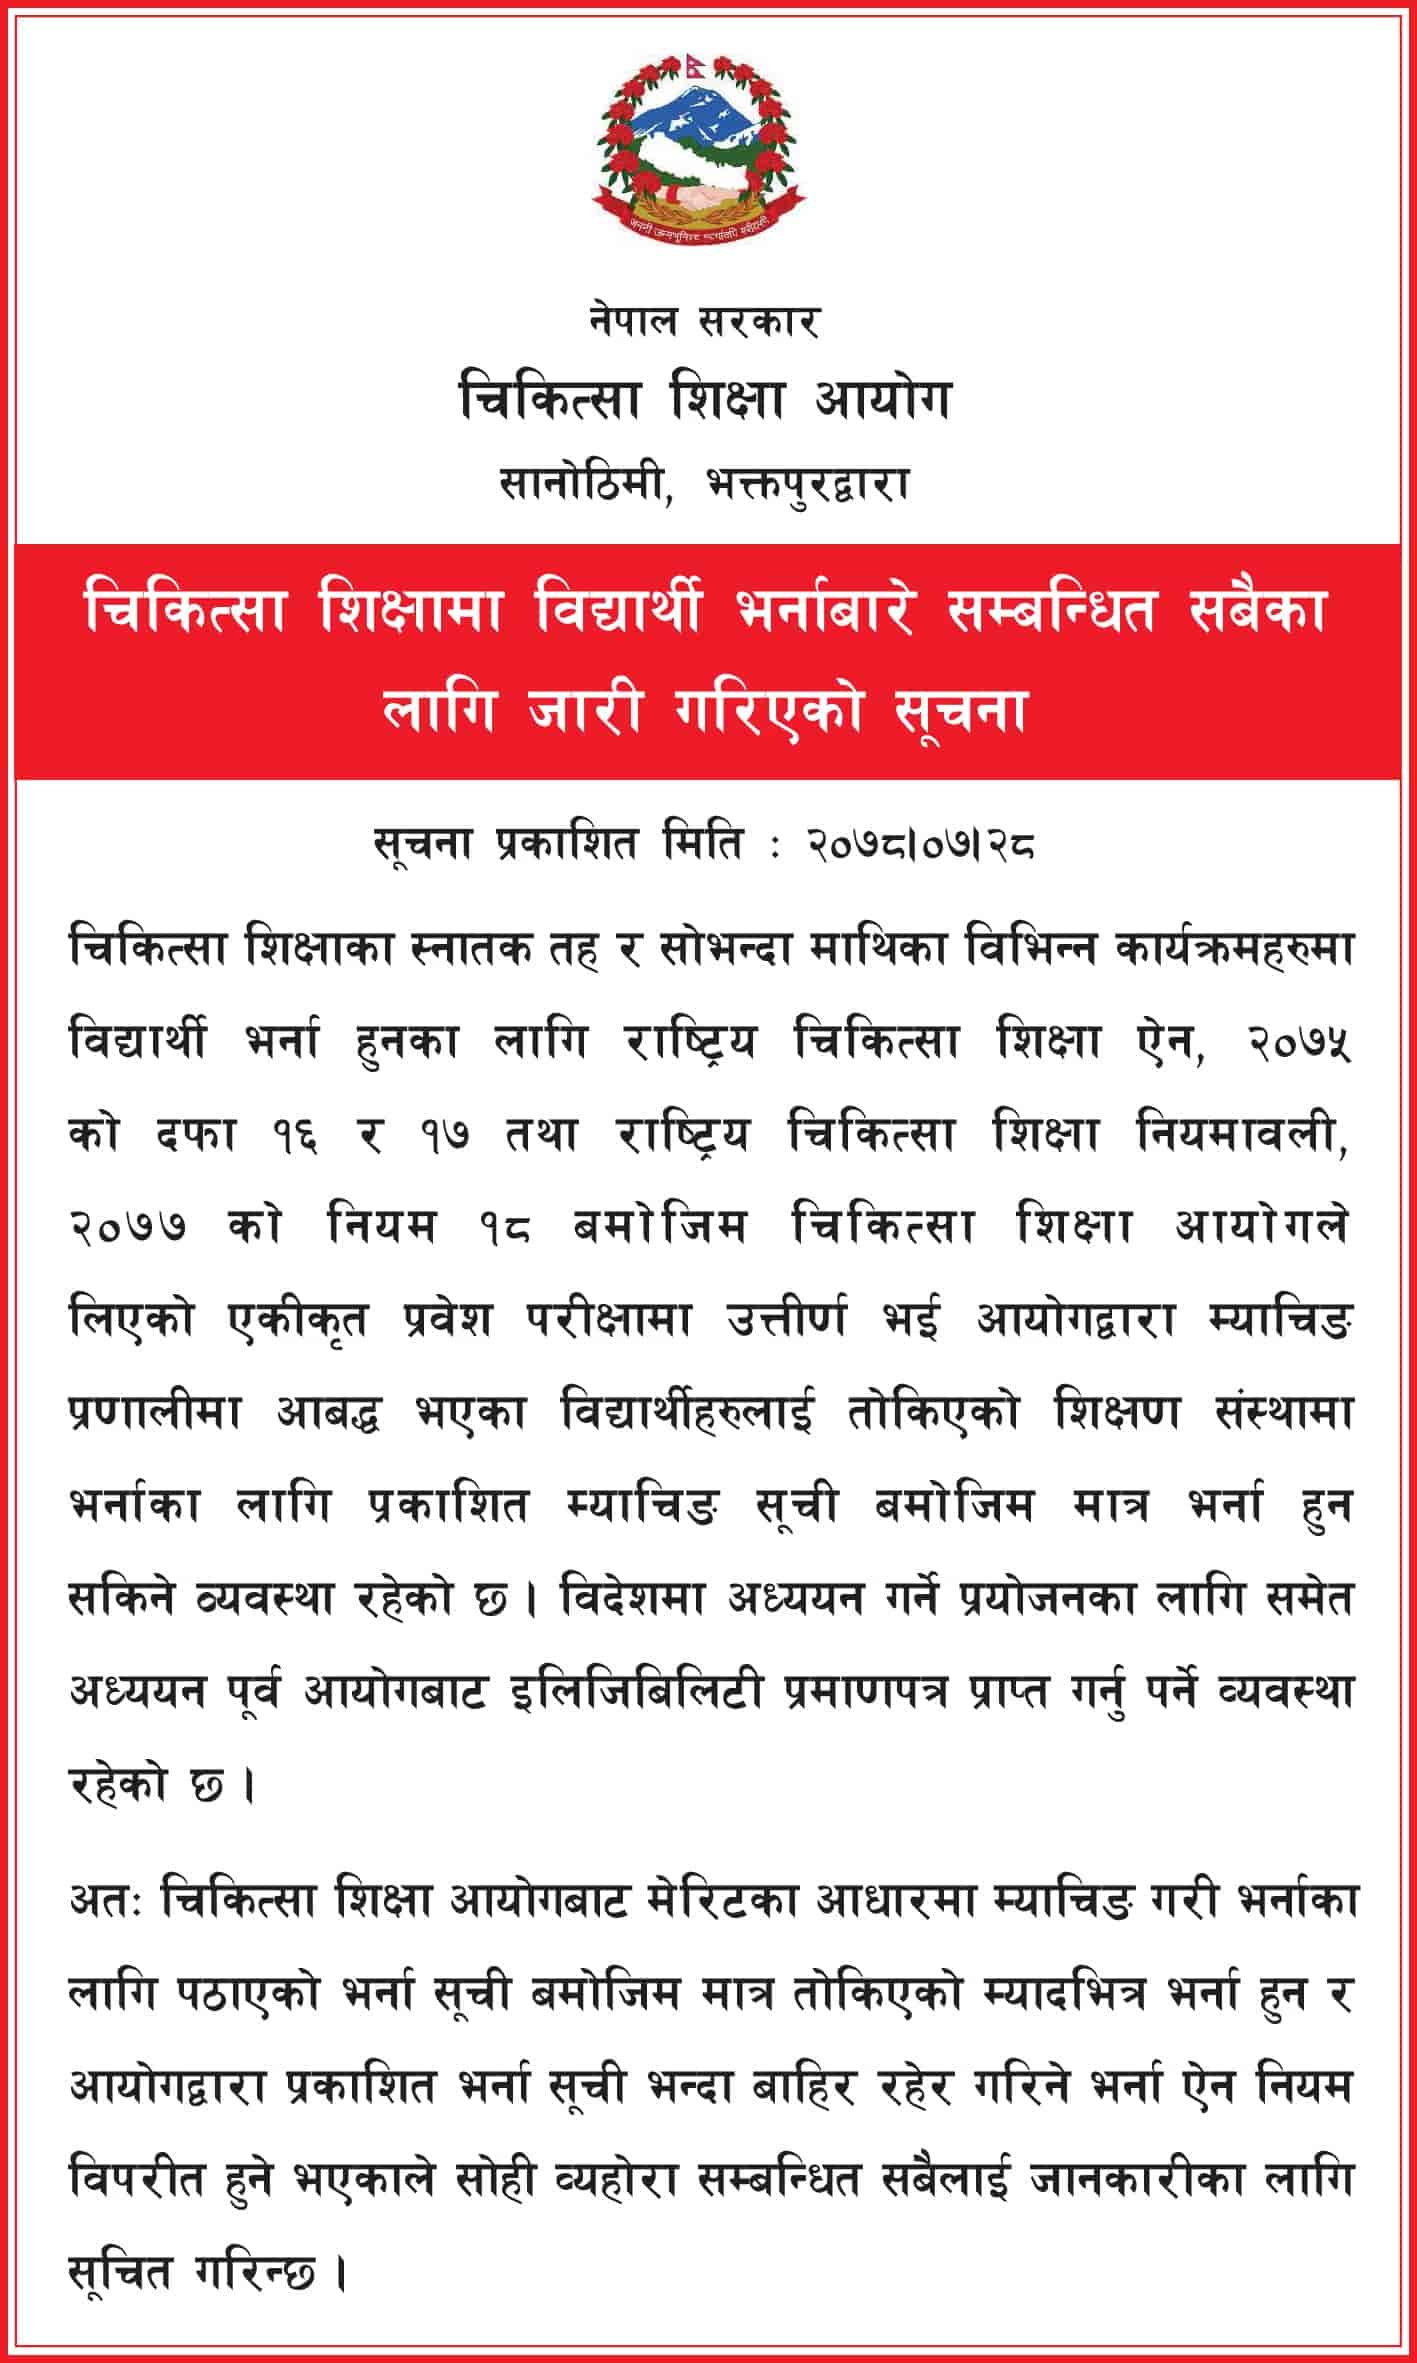 Medical Education Admission Notice from Medical Education Commission